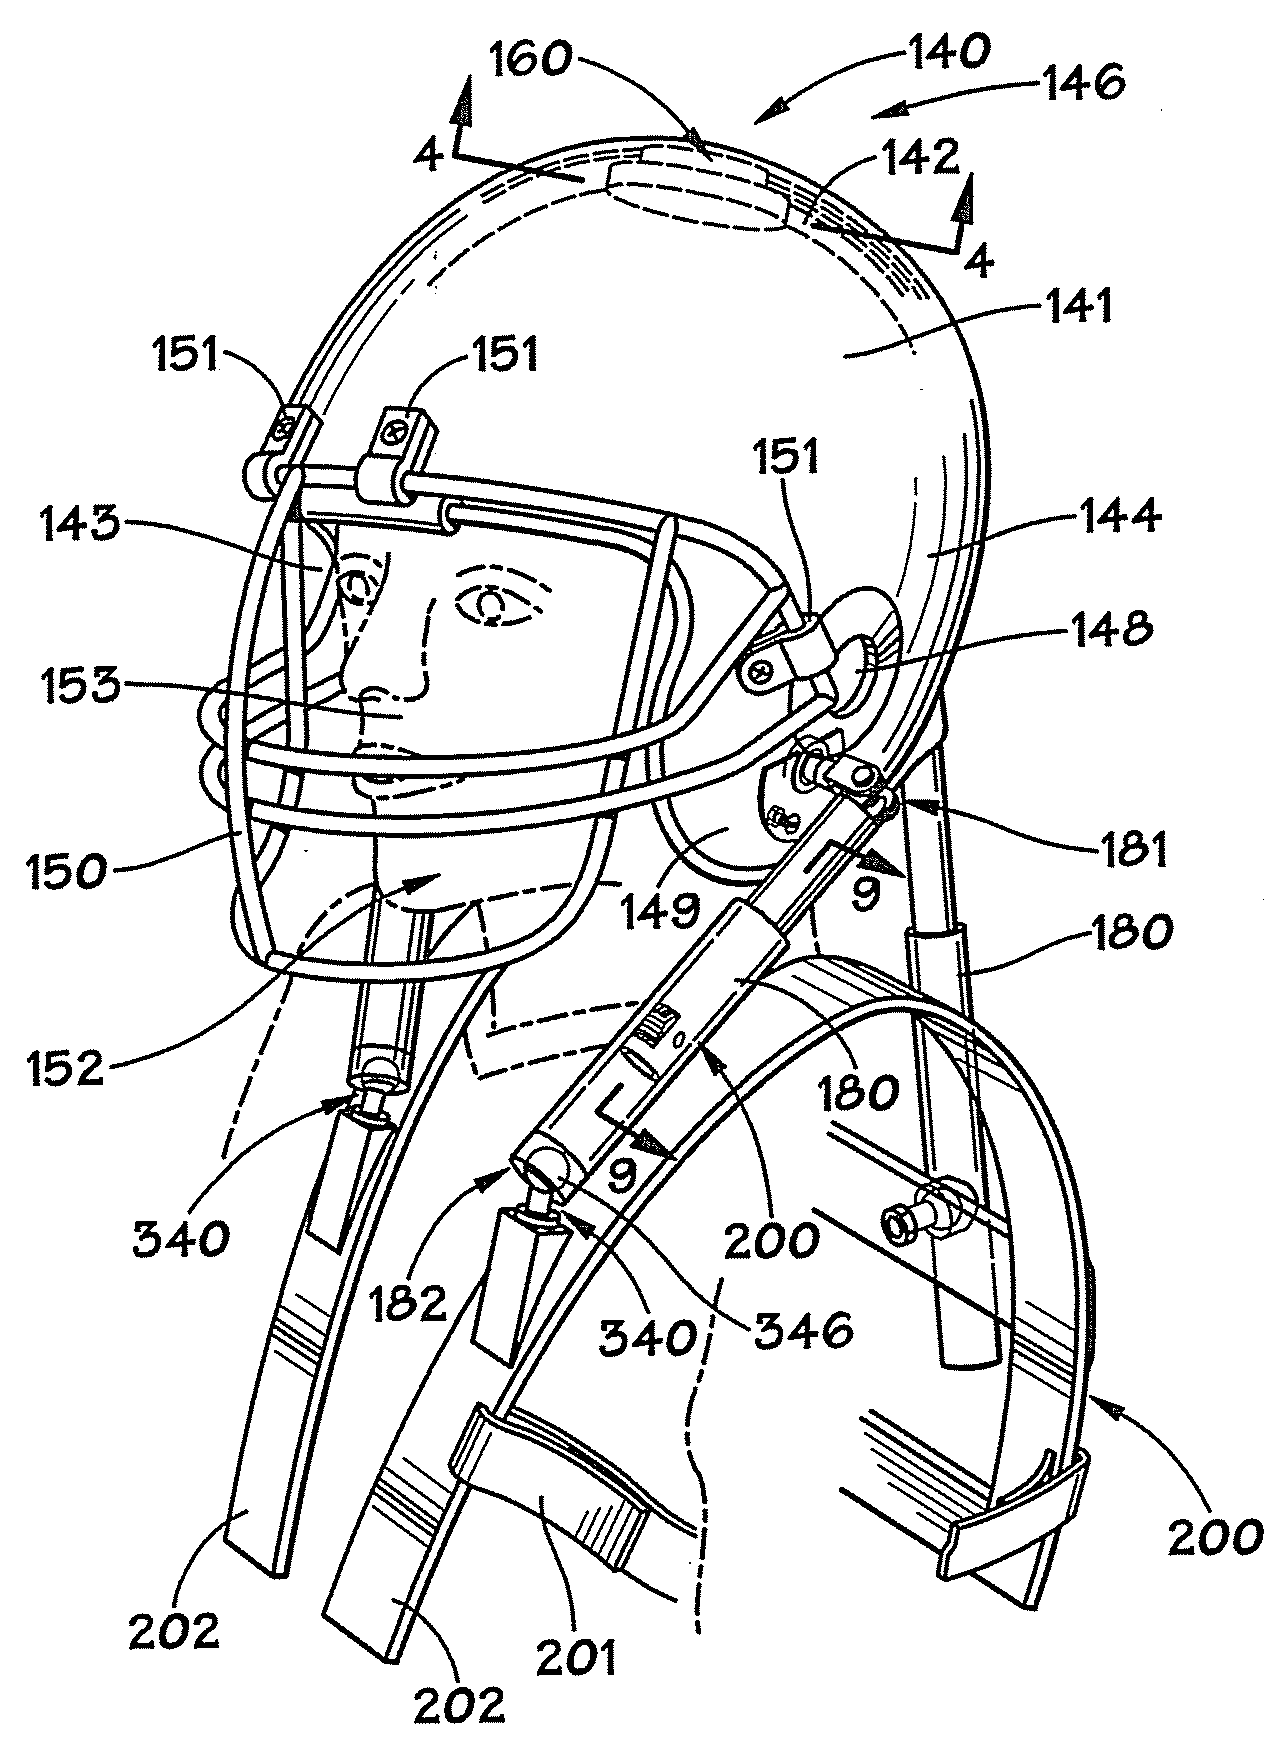 Protective helmet with cervical spine protection and additional brain protection